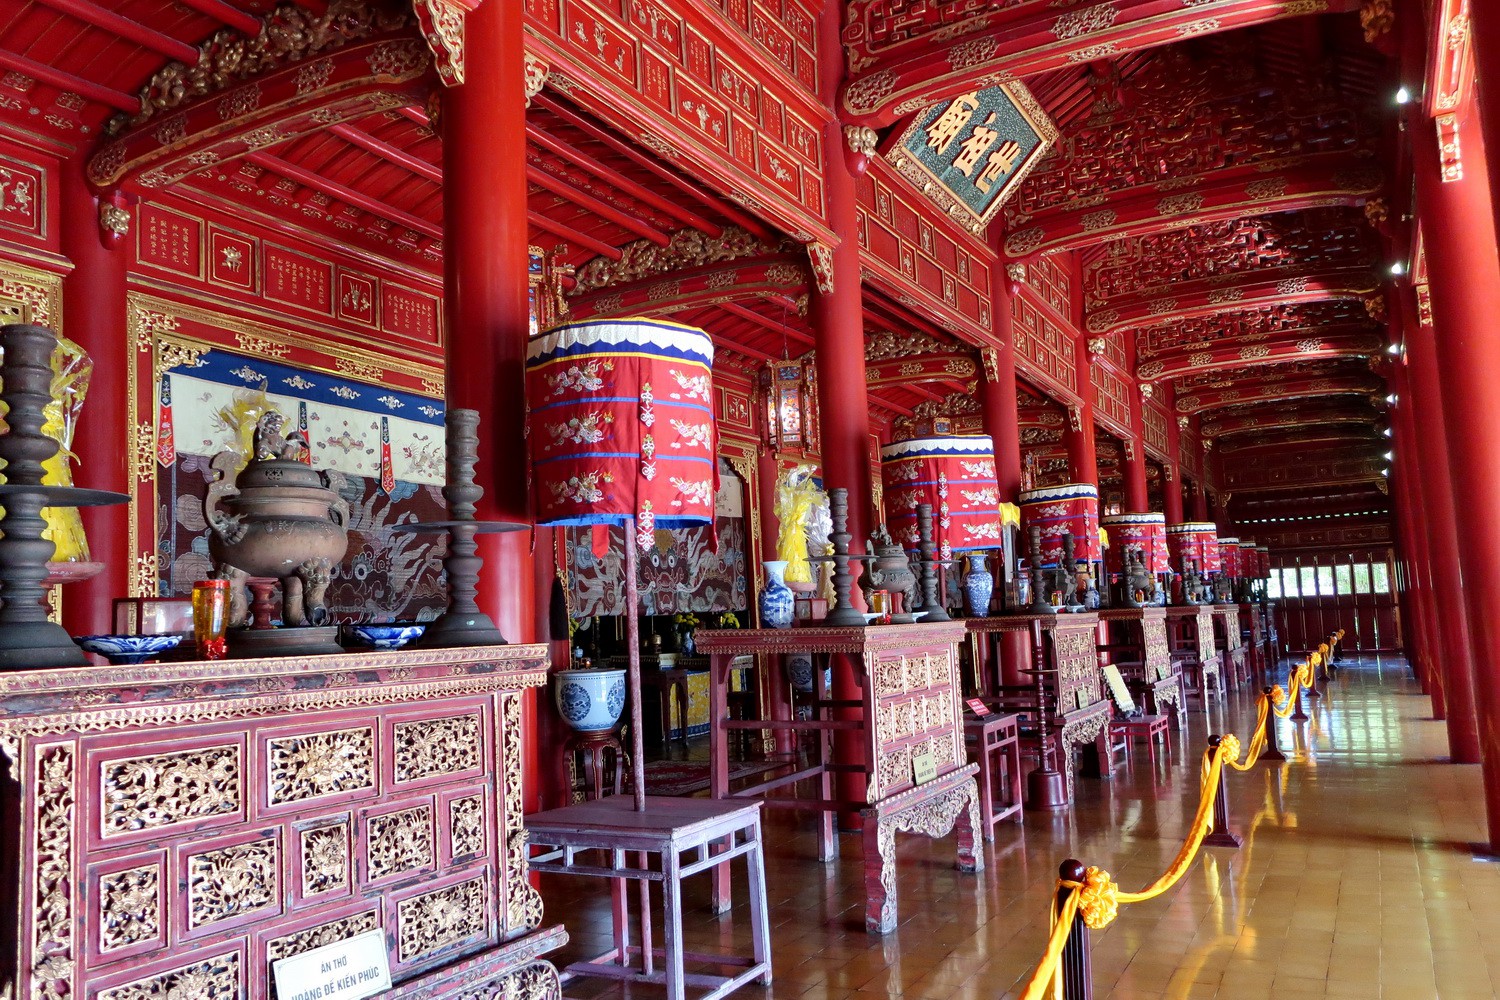 To Mieu Temple which was dedicated to the Nguyen Emperors